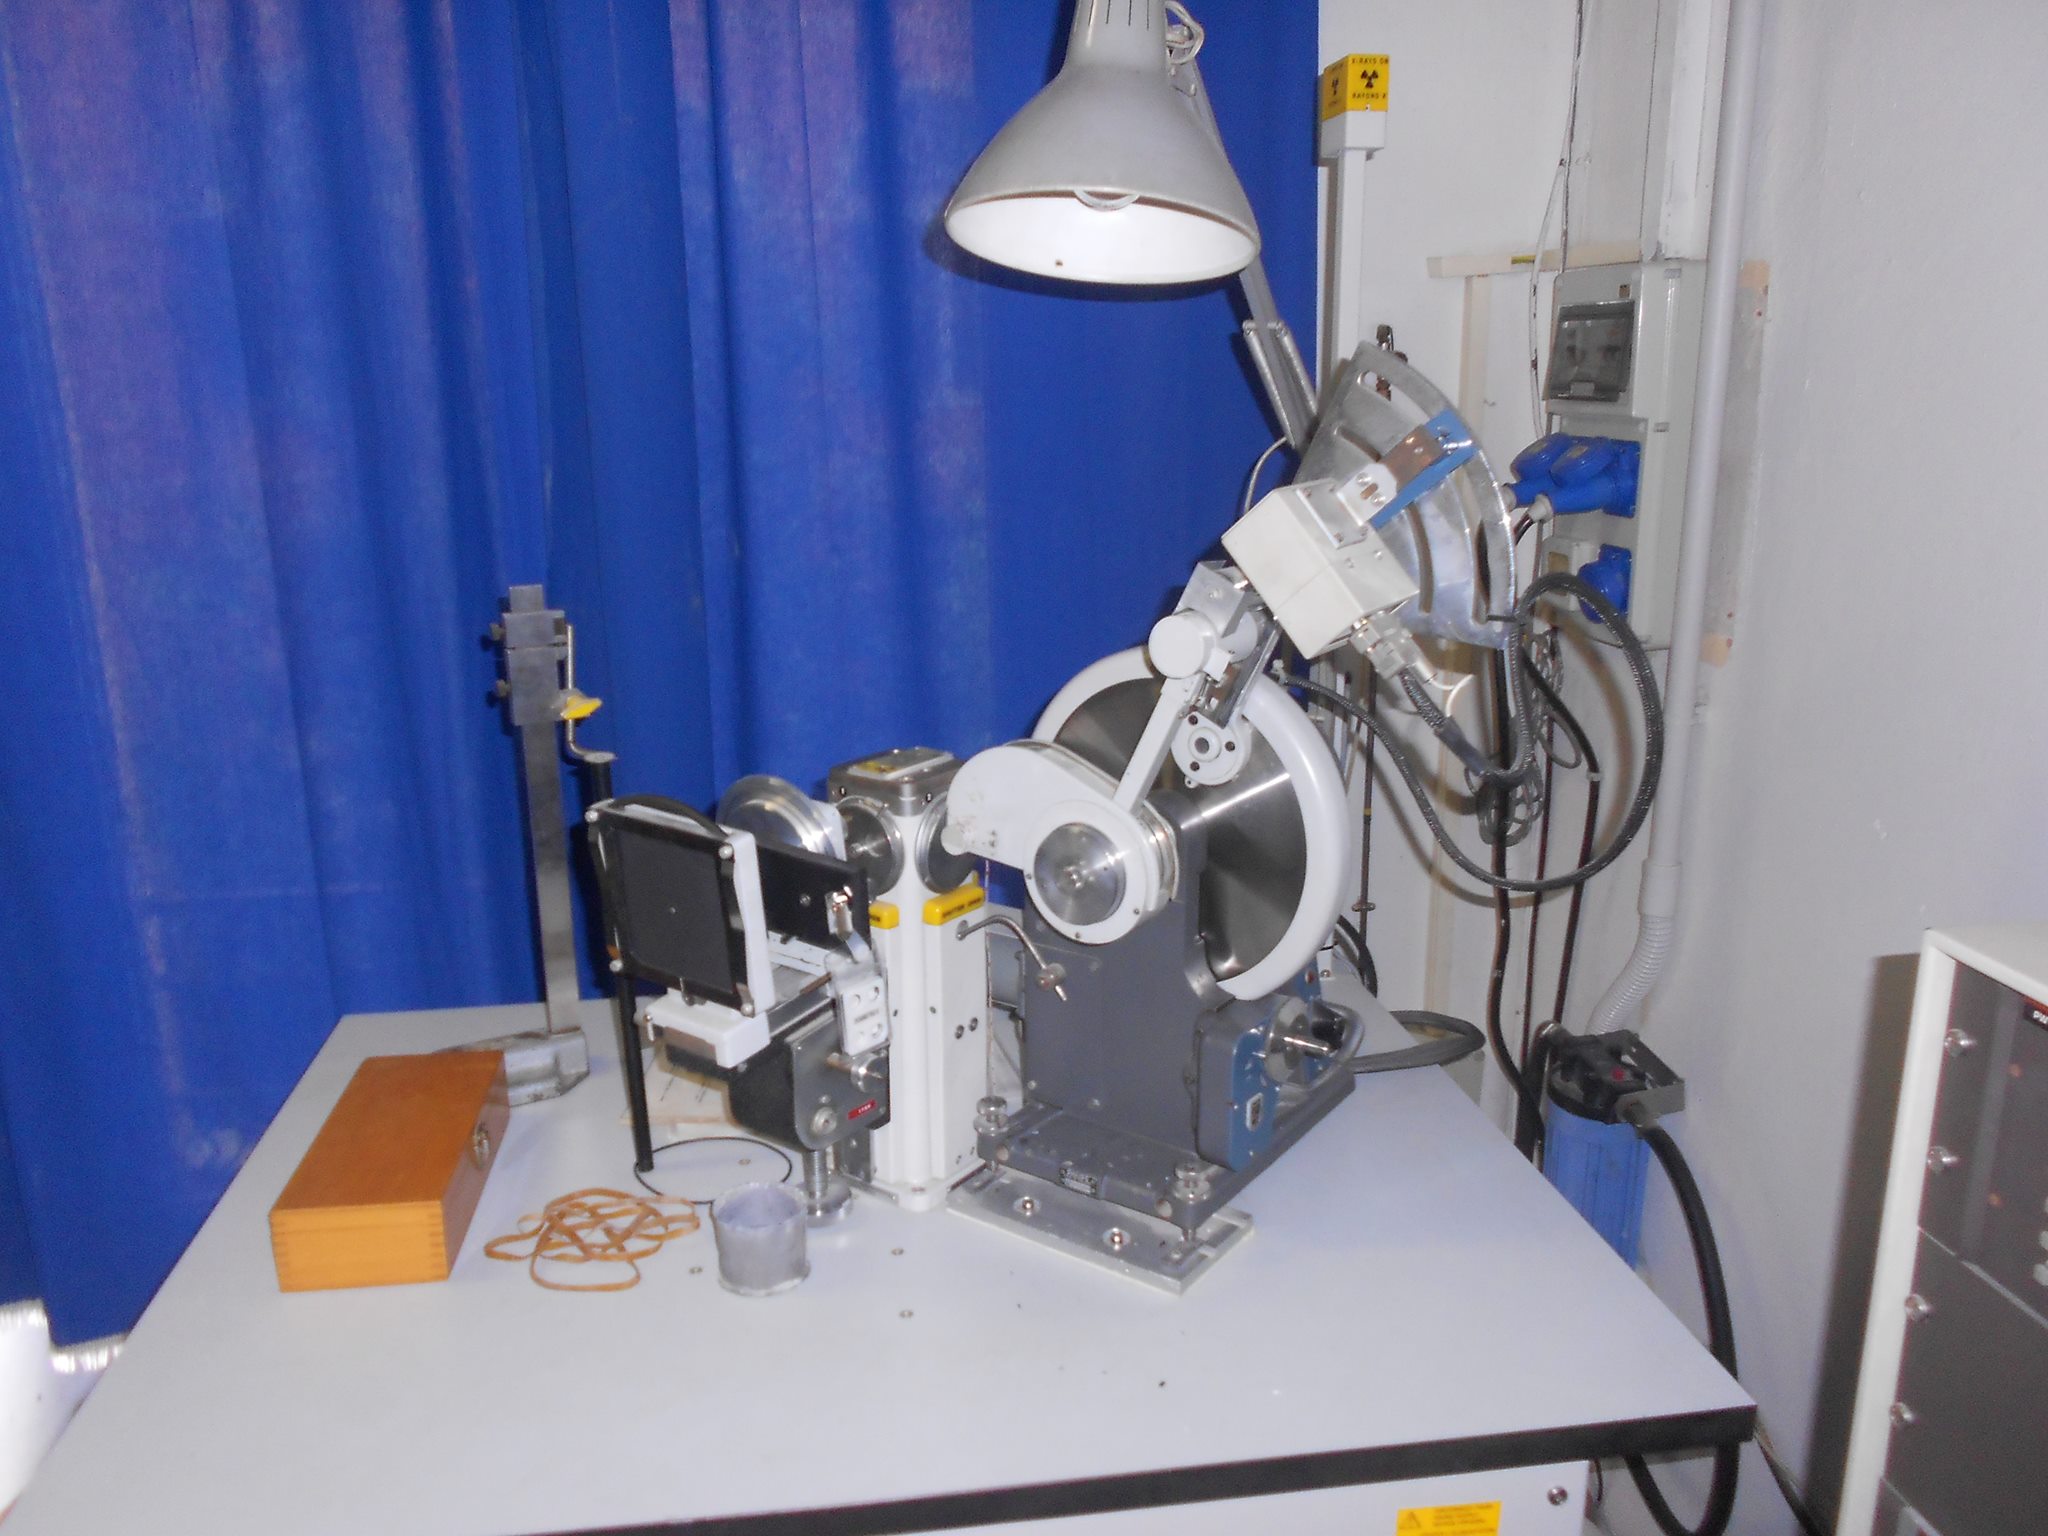 X-ray powder diffractometer with Bragg-Brentano geometry